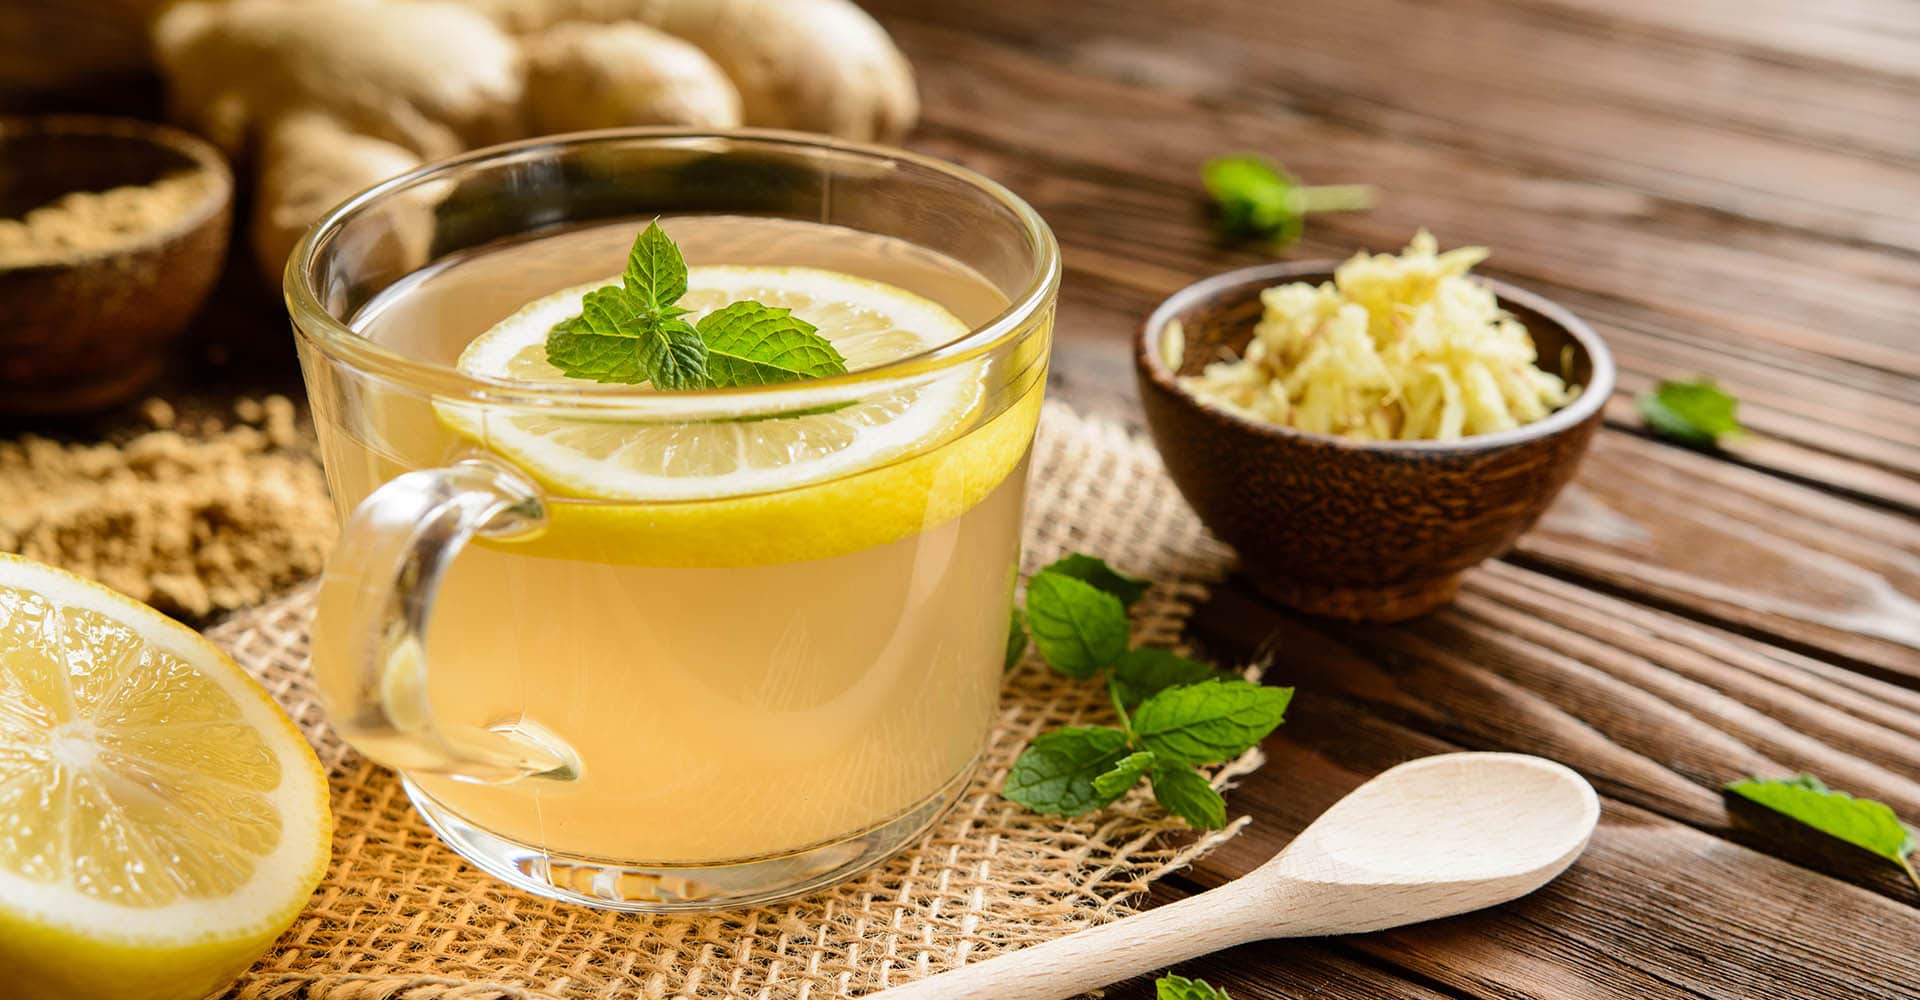 Home remedies for cold like lemon and ginger